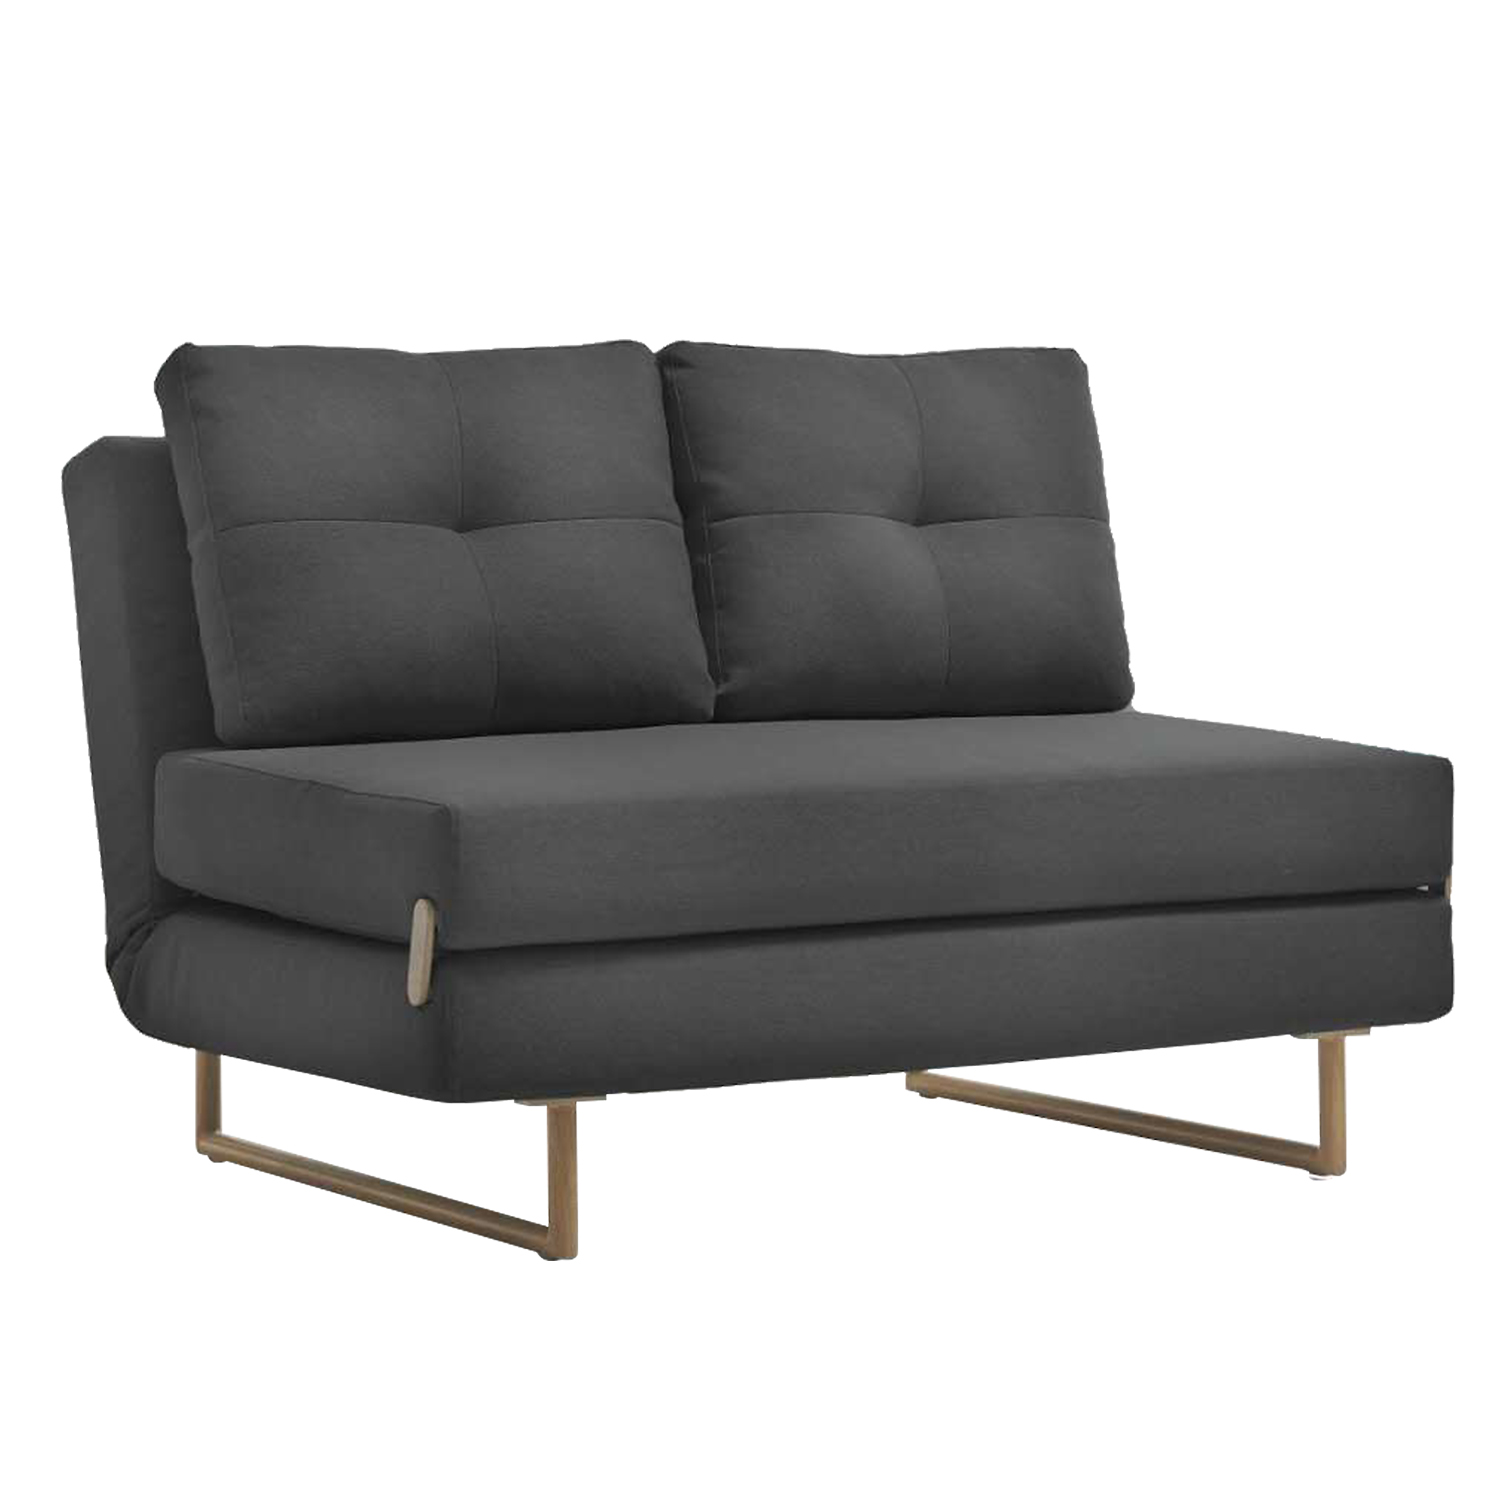 Gennaro 2 Seater Sofabed Gray